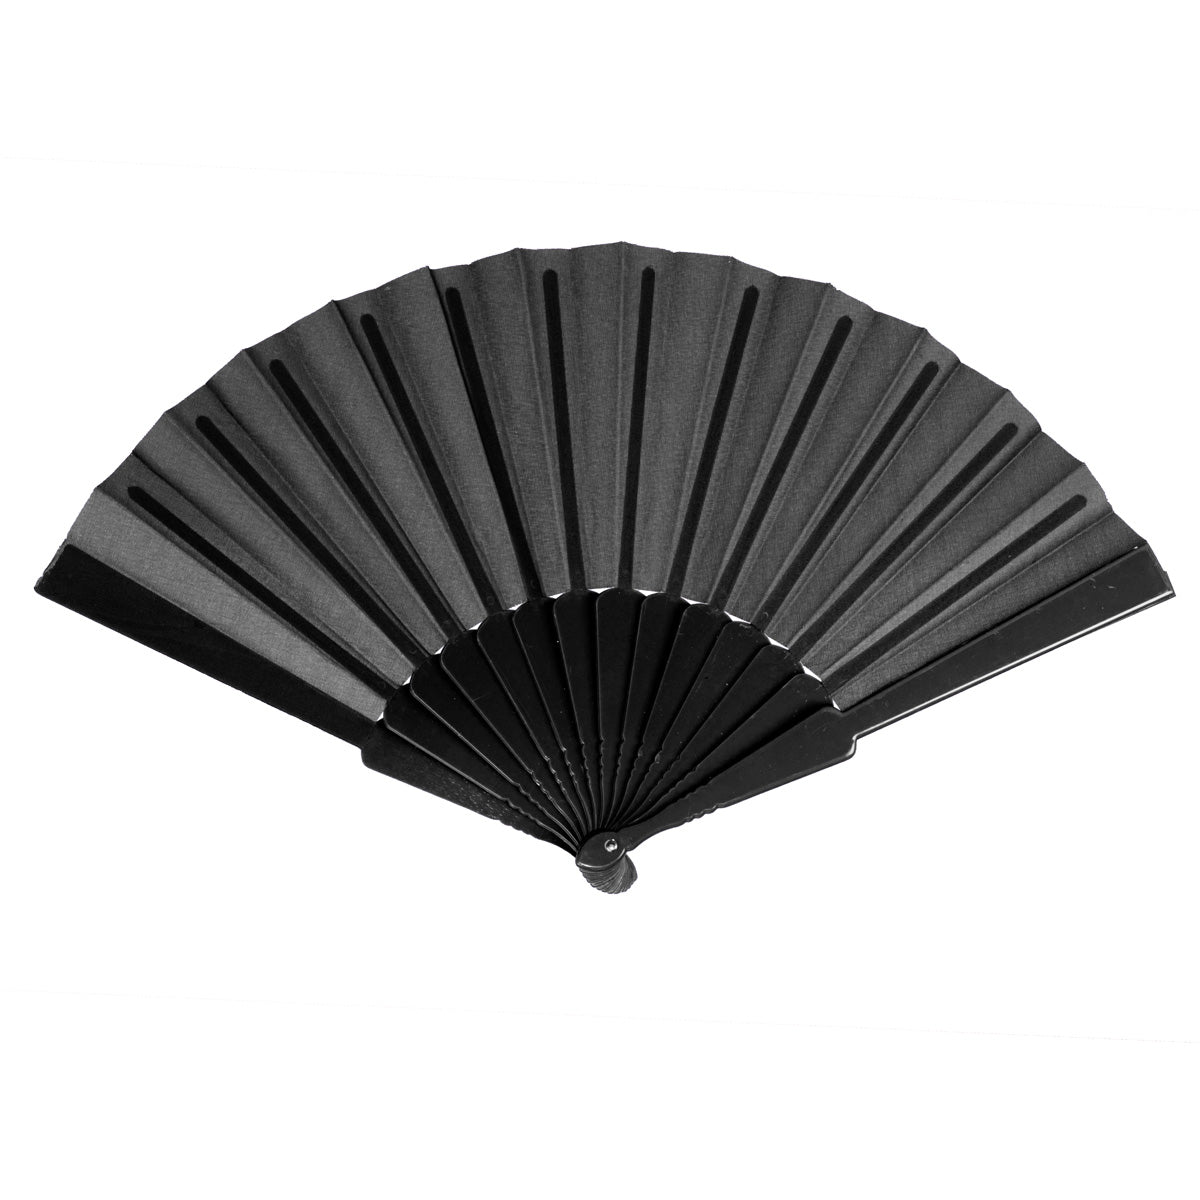 Plastic fan with cloth